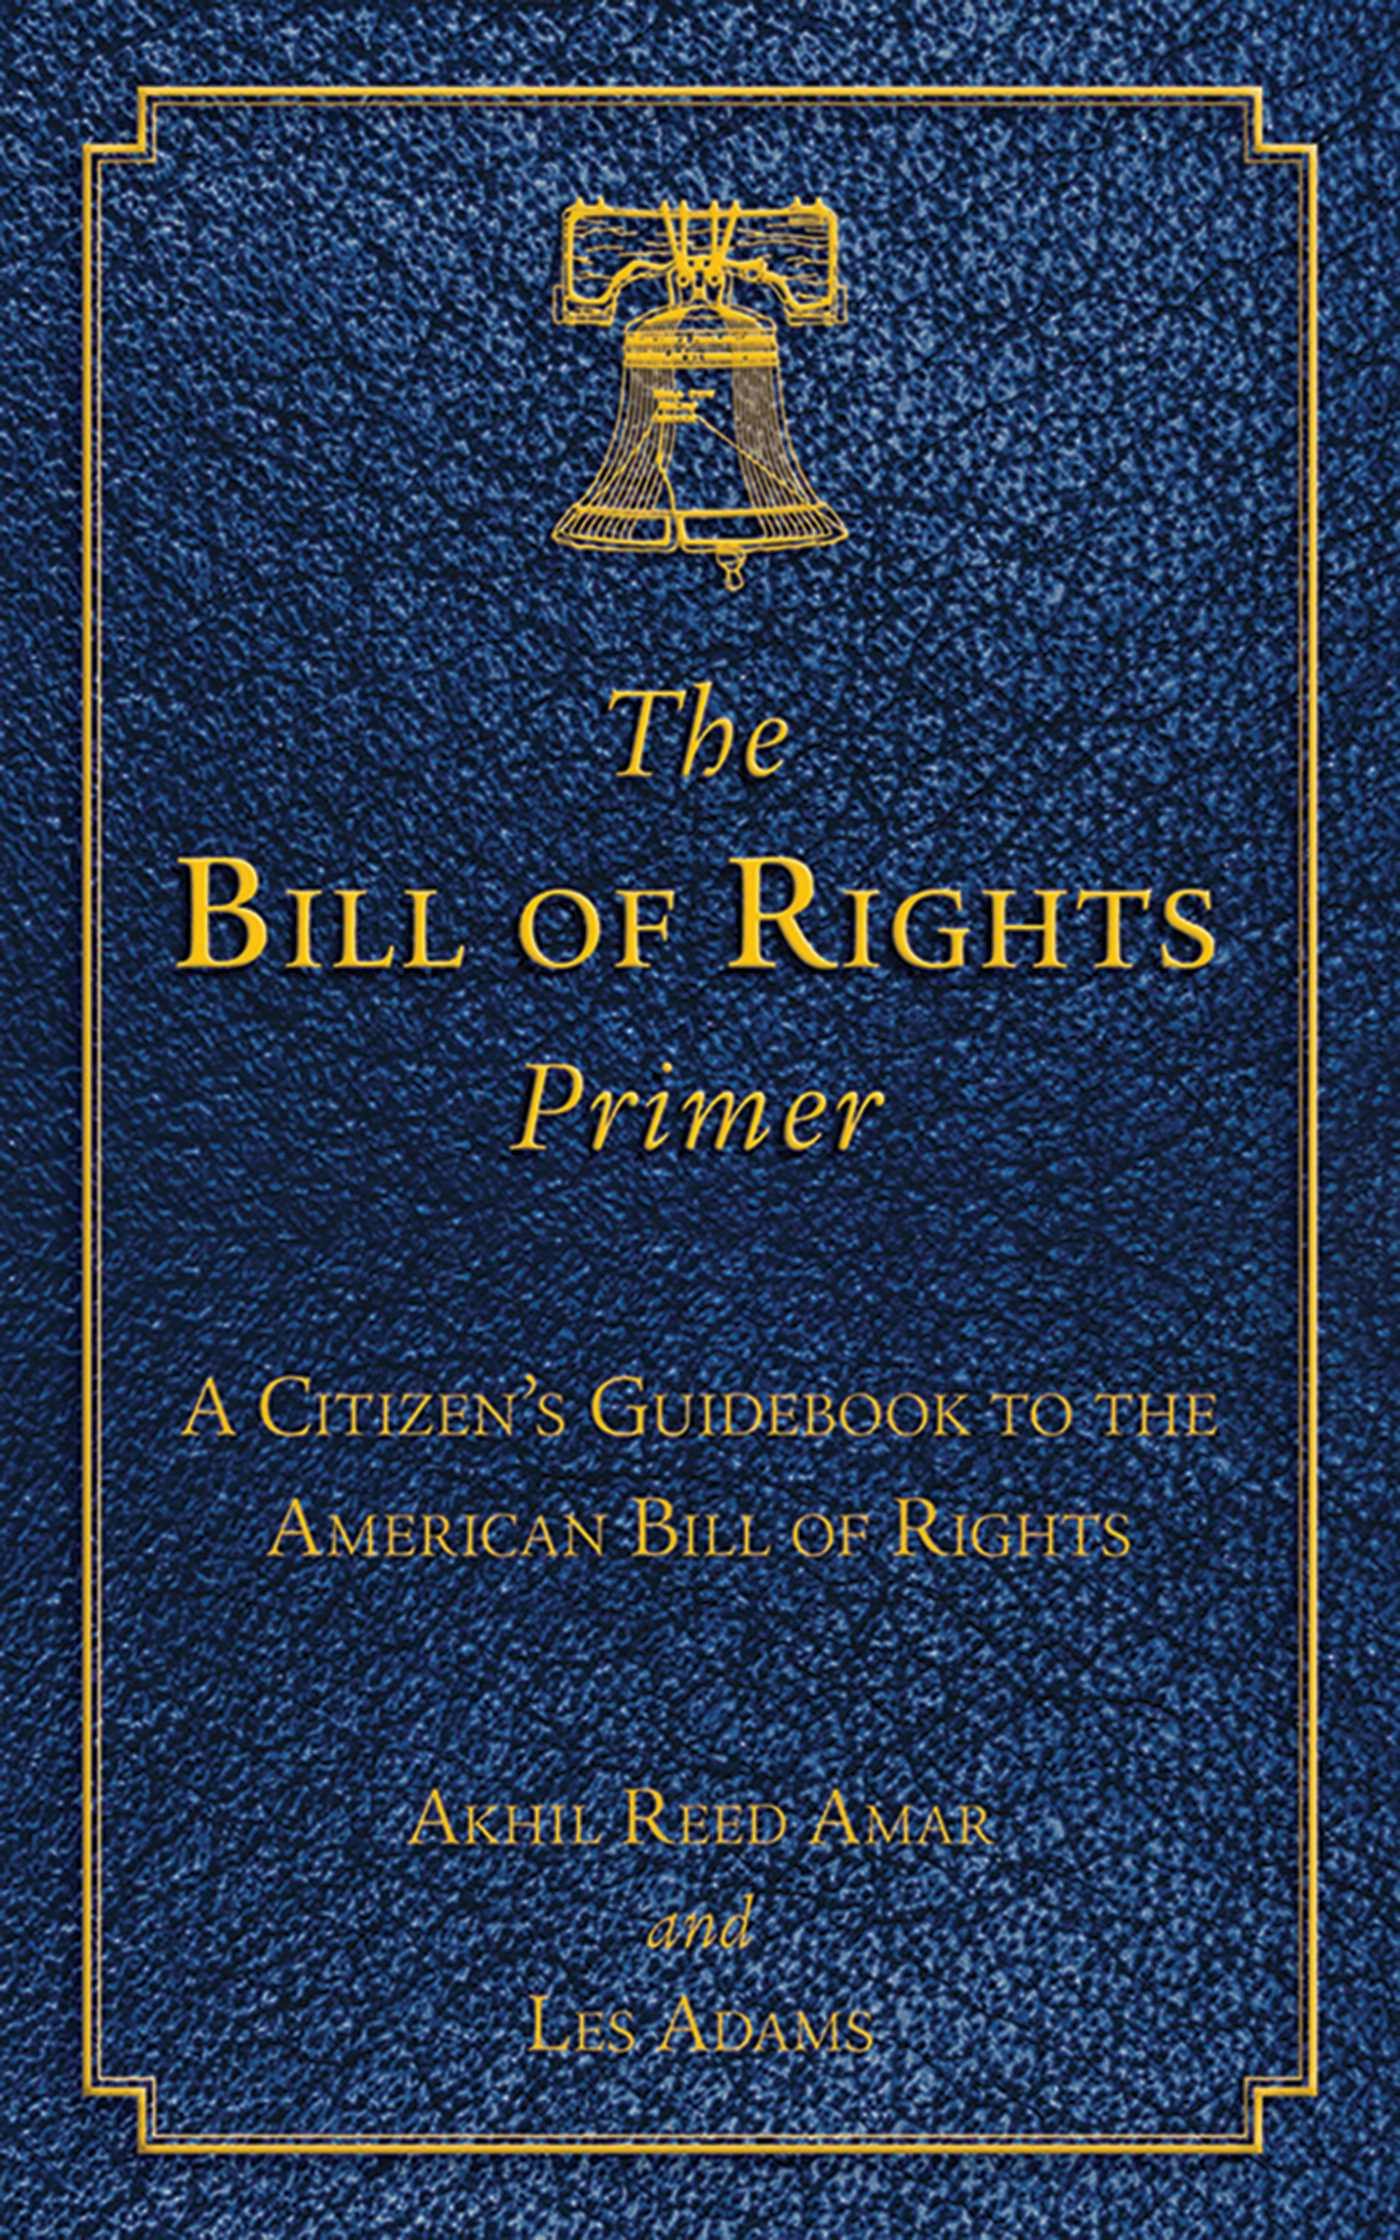 The Bill of Rights Primer: A Citizen's Guidebook to the American Bill of Rights - Akhil Reed Amar, Les Adams